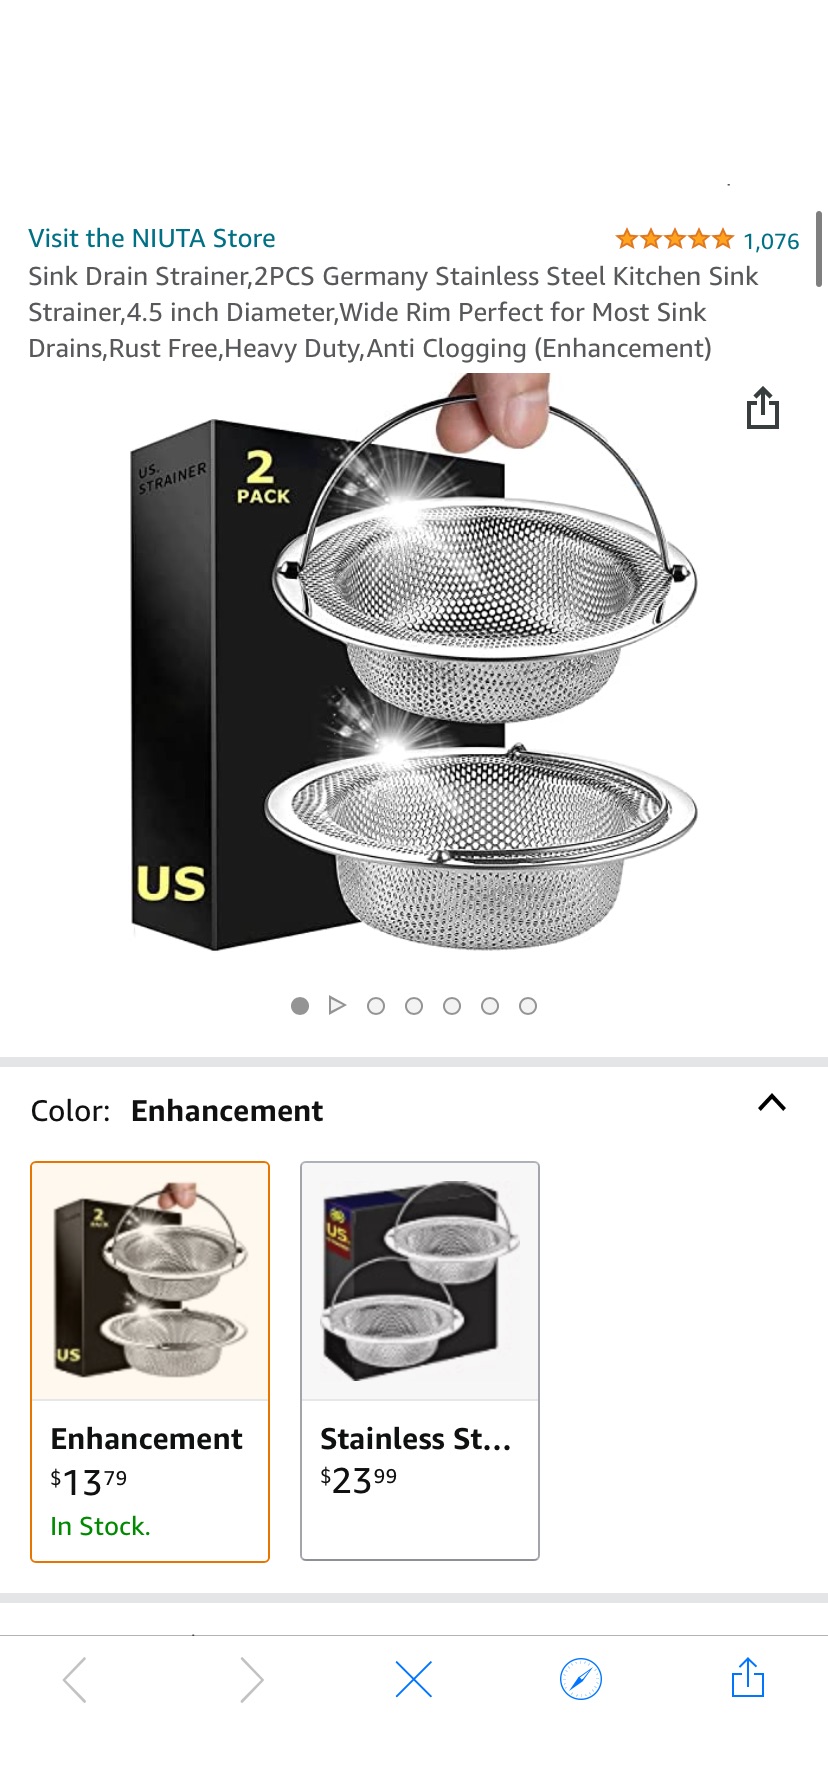 Sink Drain Strainer,2PCS Germany Stainless Steel Kitchen Sink Strainer,4.5 inch Diameter,Wide Rim Perfect for Most Sink Drains,Rust Free,Heavy Duty,Anti Clogging (Enhancement) - - Amazon.com